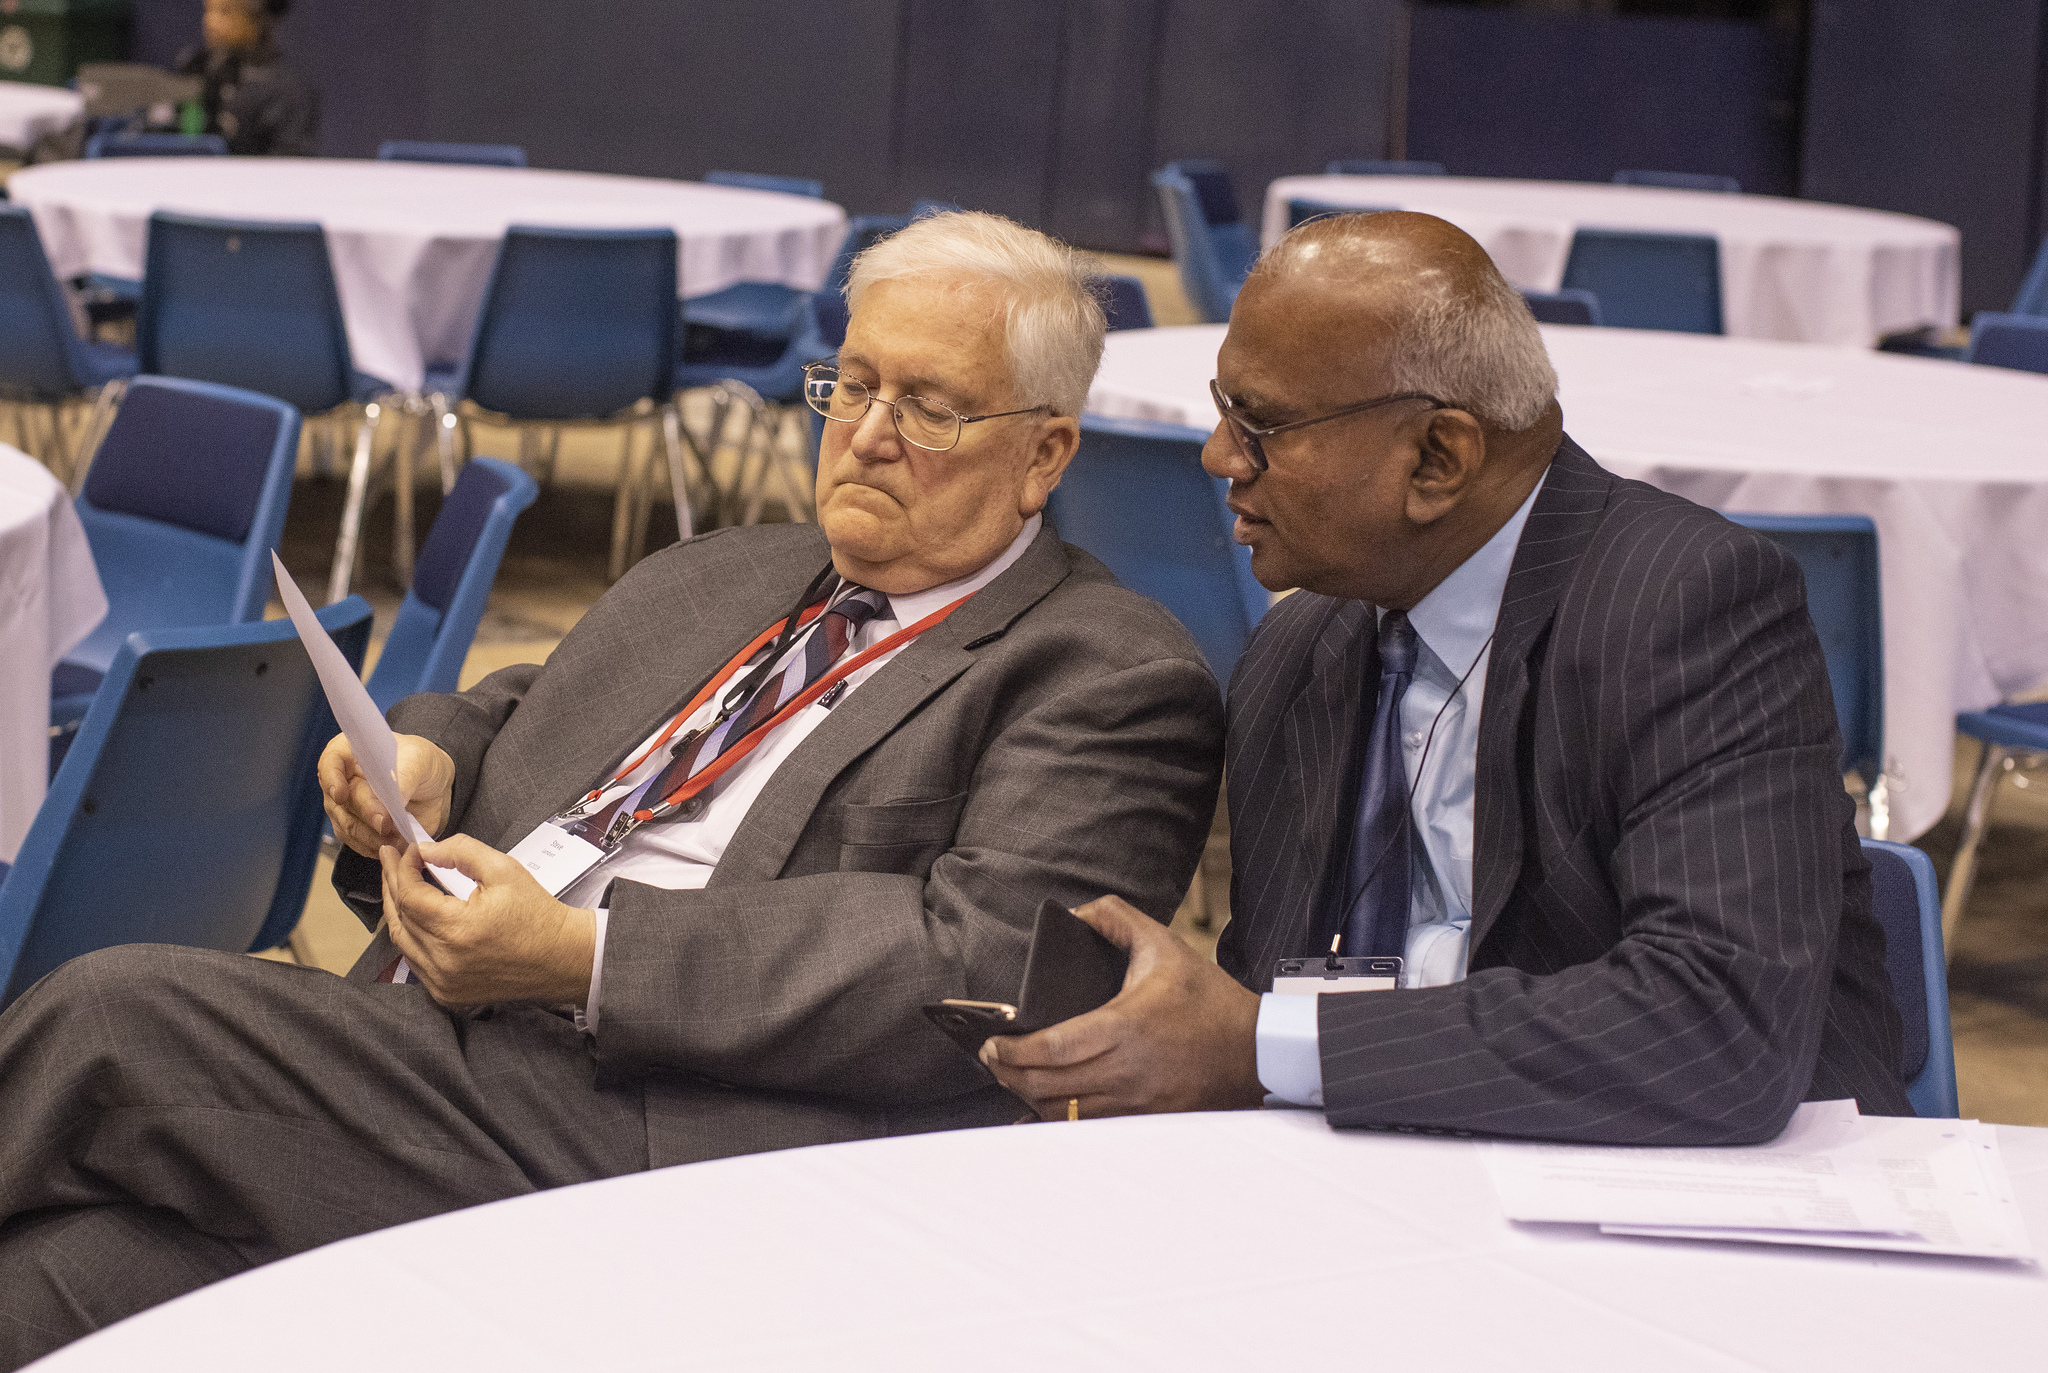 Steven Lambert (left), general counsel, and A. Moses   Kumar, general secretary and treasurer, both at The   General Council on Finance and Administration, listen   from the floor during the 2019 United Methodist General   Conference in St. Louis on Feb. 25. Photo by Kathleen   Barry, UMNS.